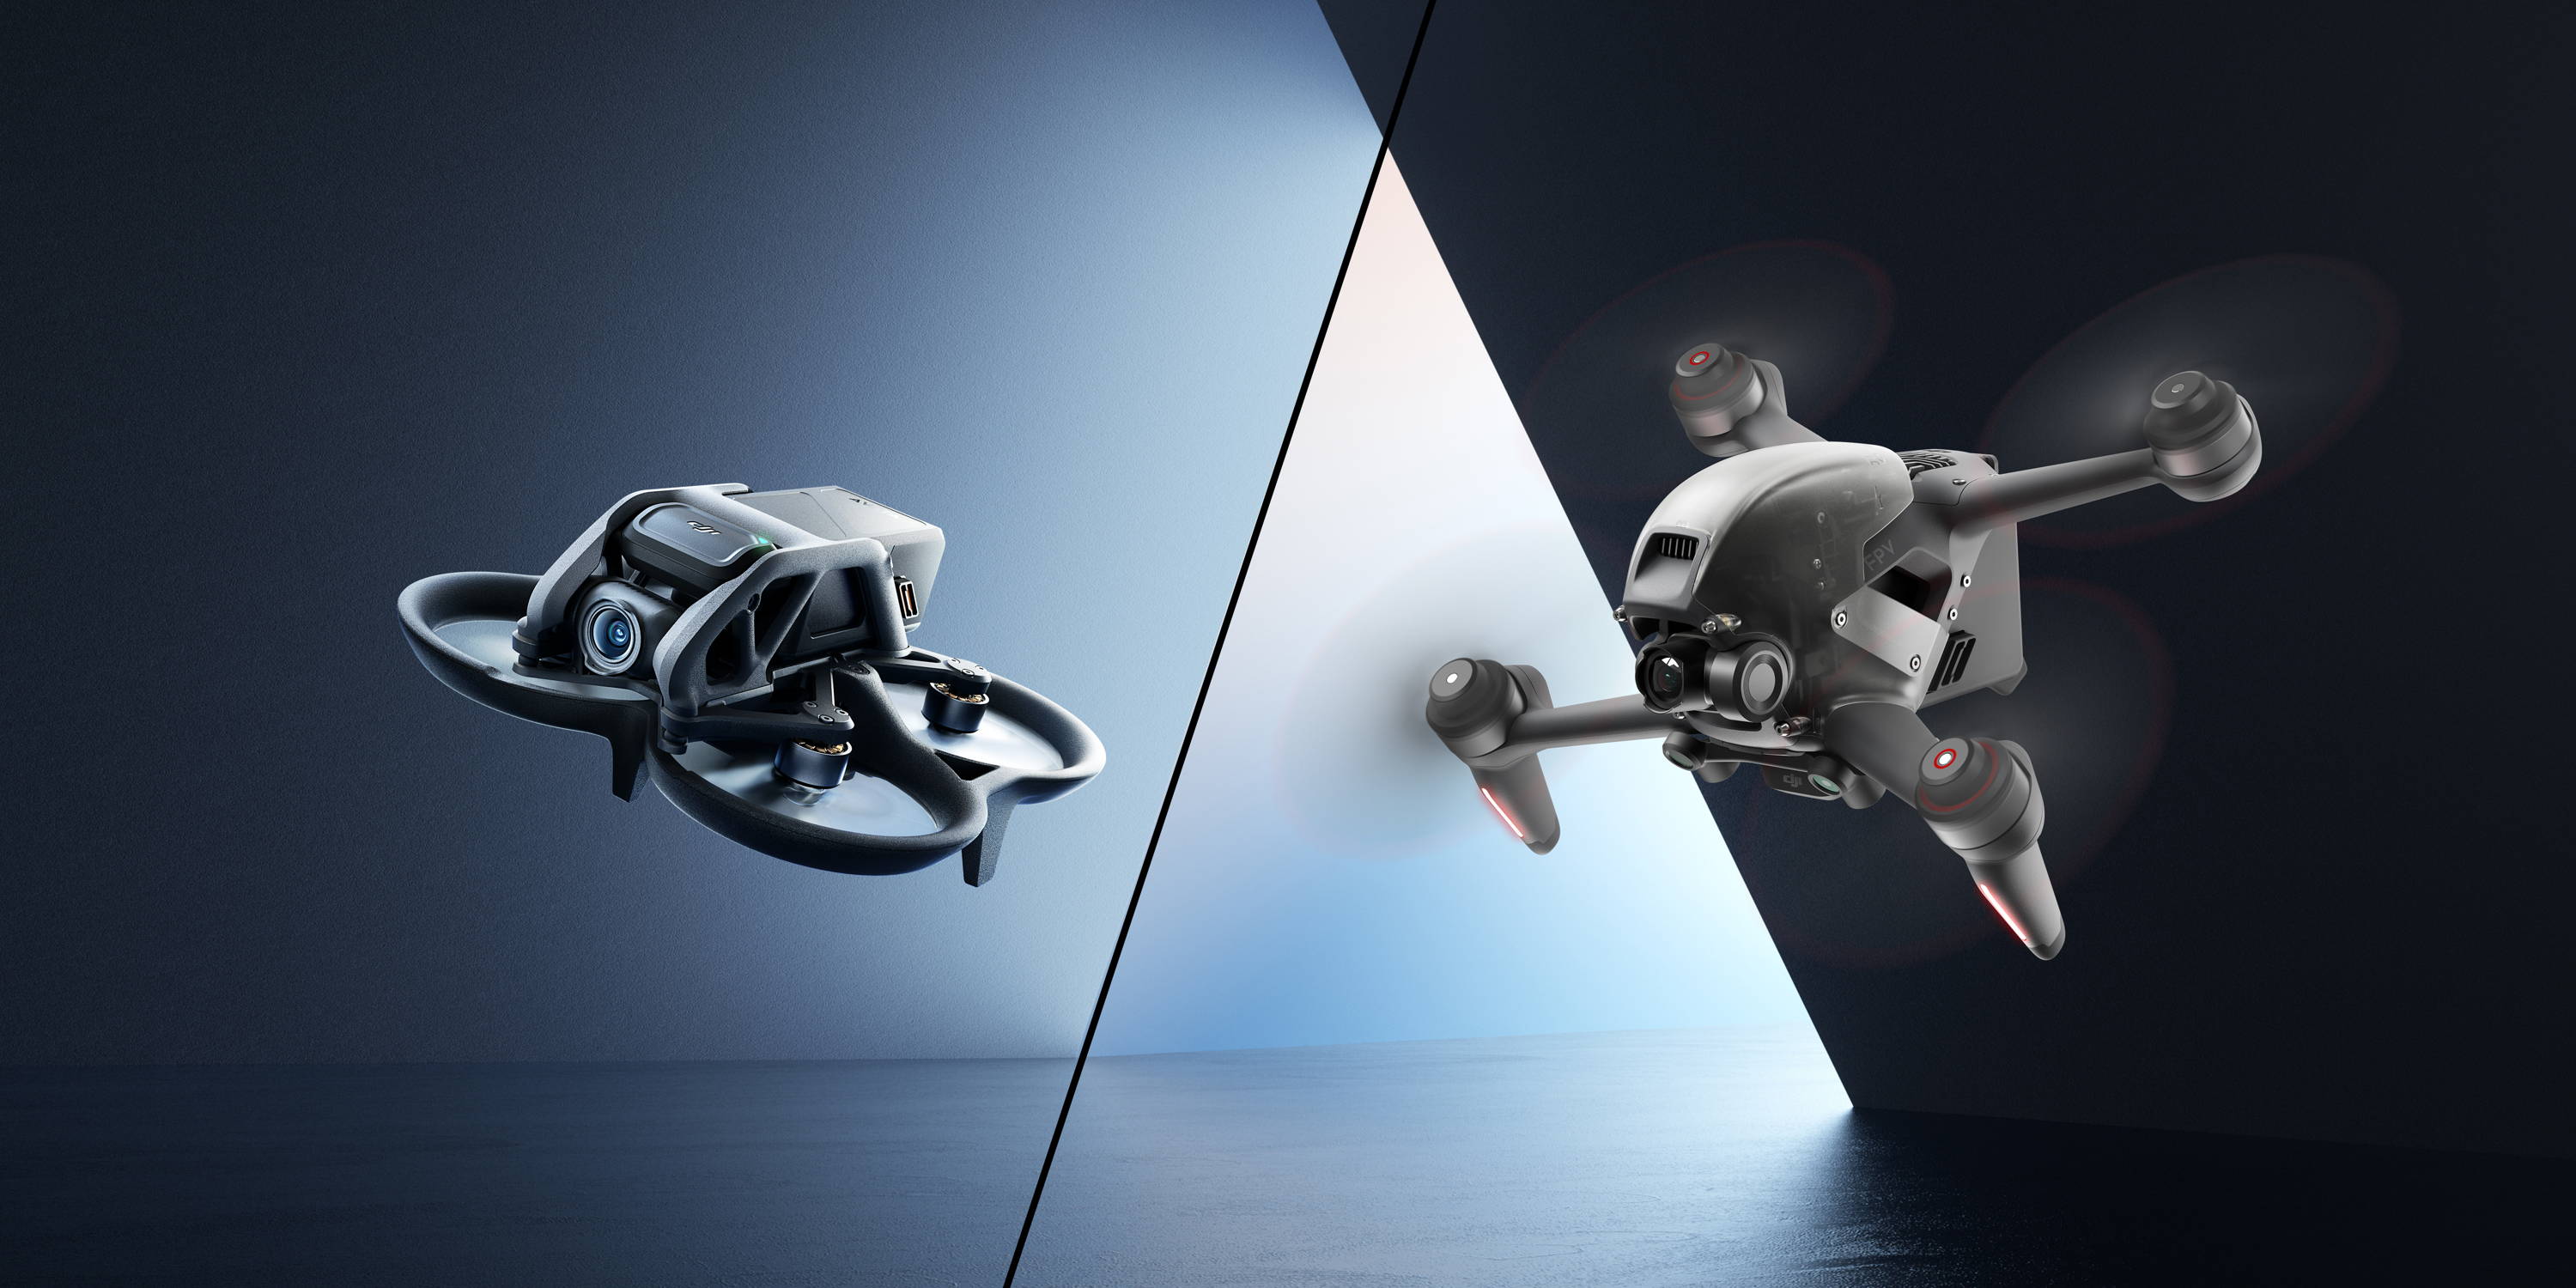 DJI Avata vs DJI FPV: Which FPV Drone Is Right For You?